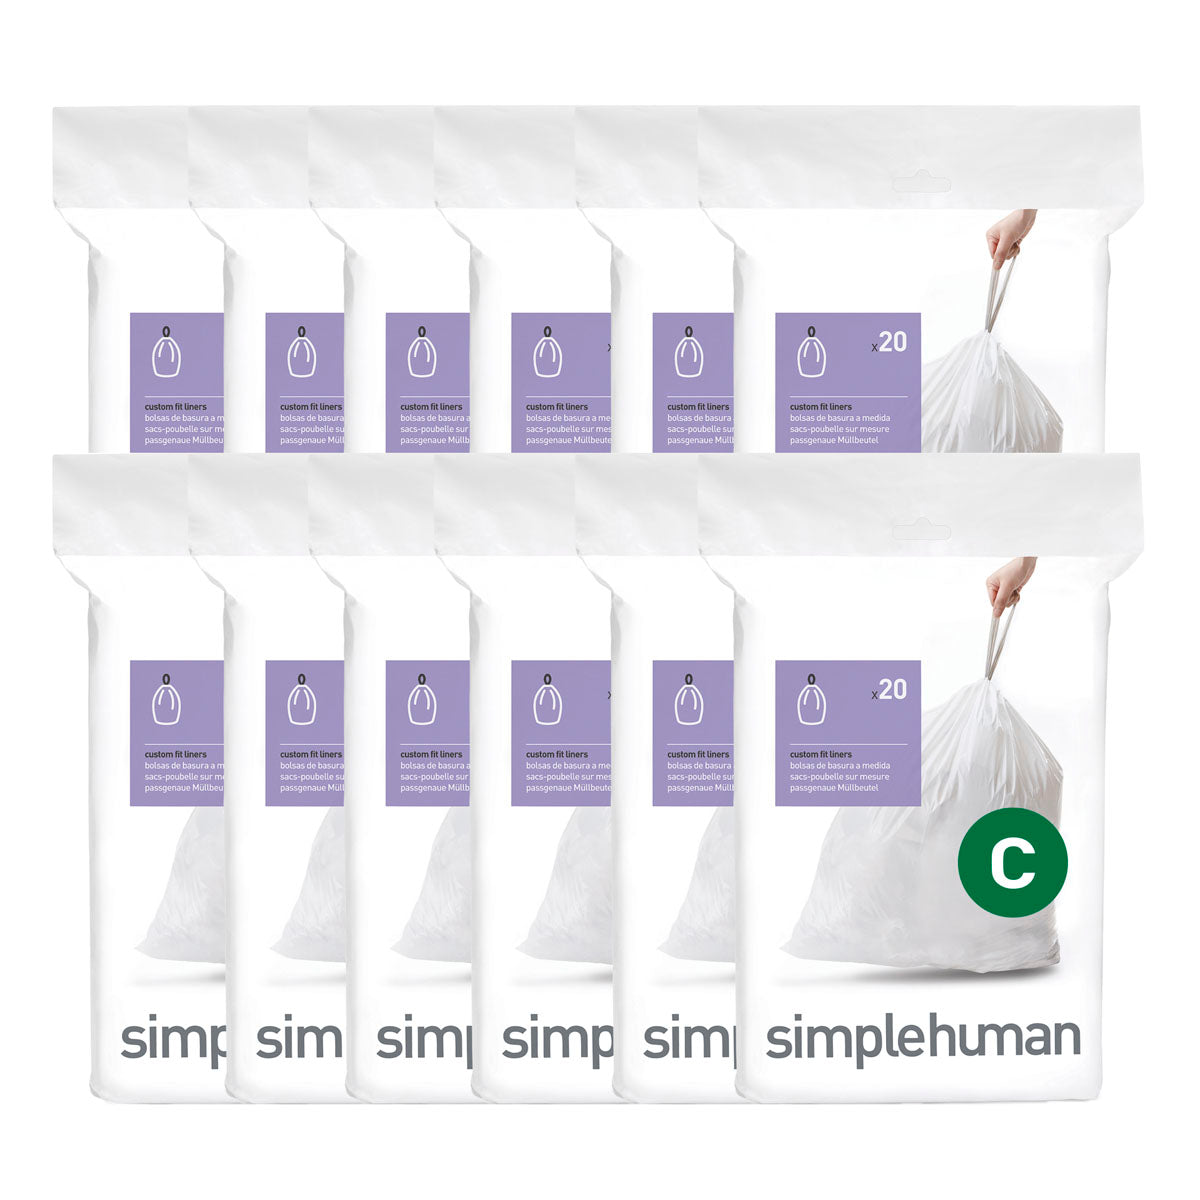 Simplehuman Bin Trash Can Bags Liners New 6 Litres Size B Box Pack of 30  Bags